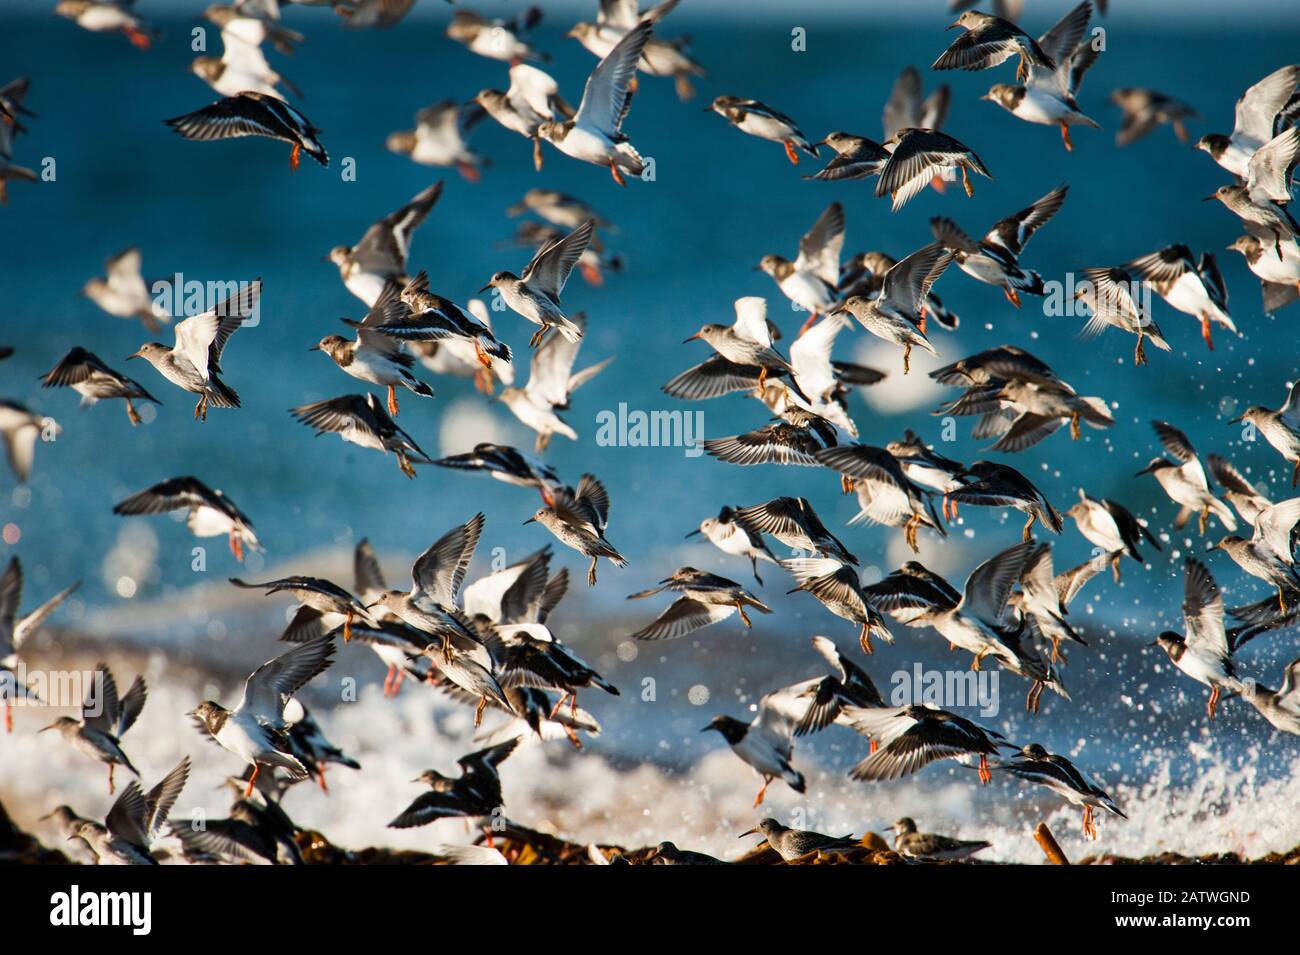 Turnstones (Arenaria interpres) and Purple sandpipers (Calidris maritima) over wintering on the beaches of the Orkney Isles, Scotland, UK, April. Stock Photo